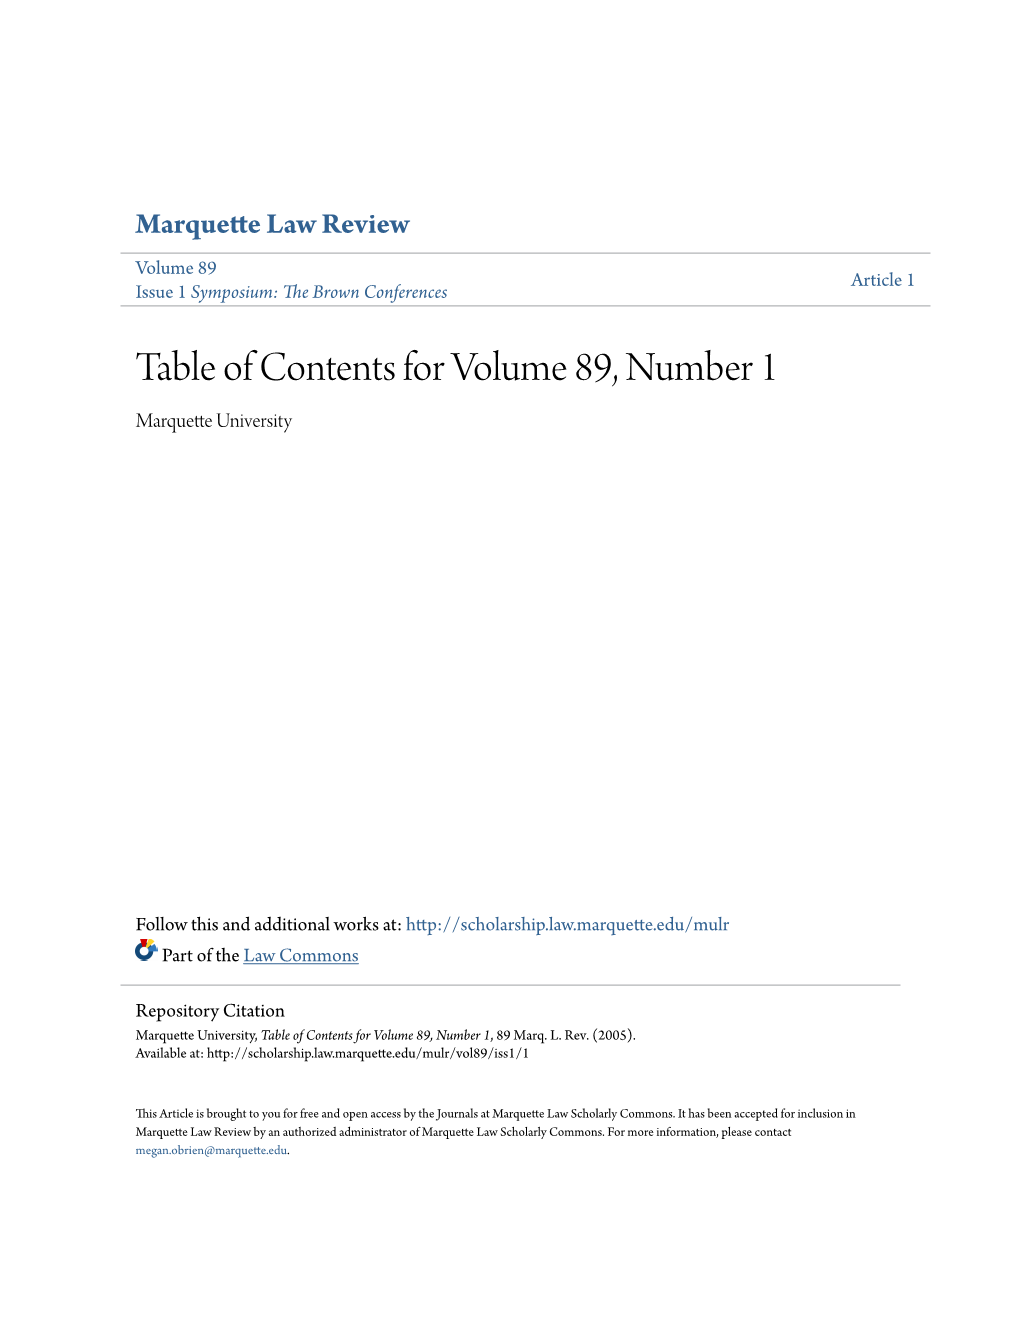 Table of Contents for Volume 89, Number 1 Marquette University